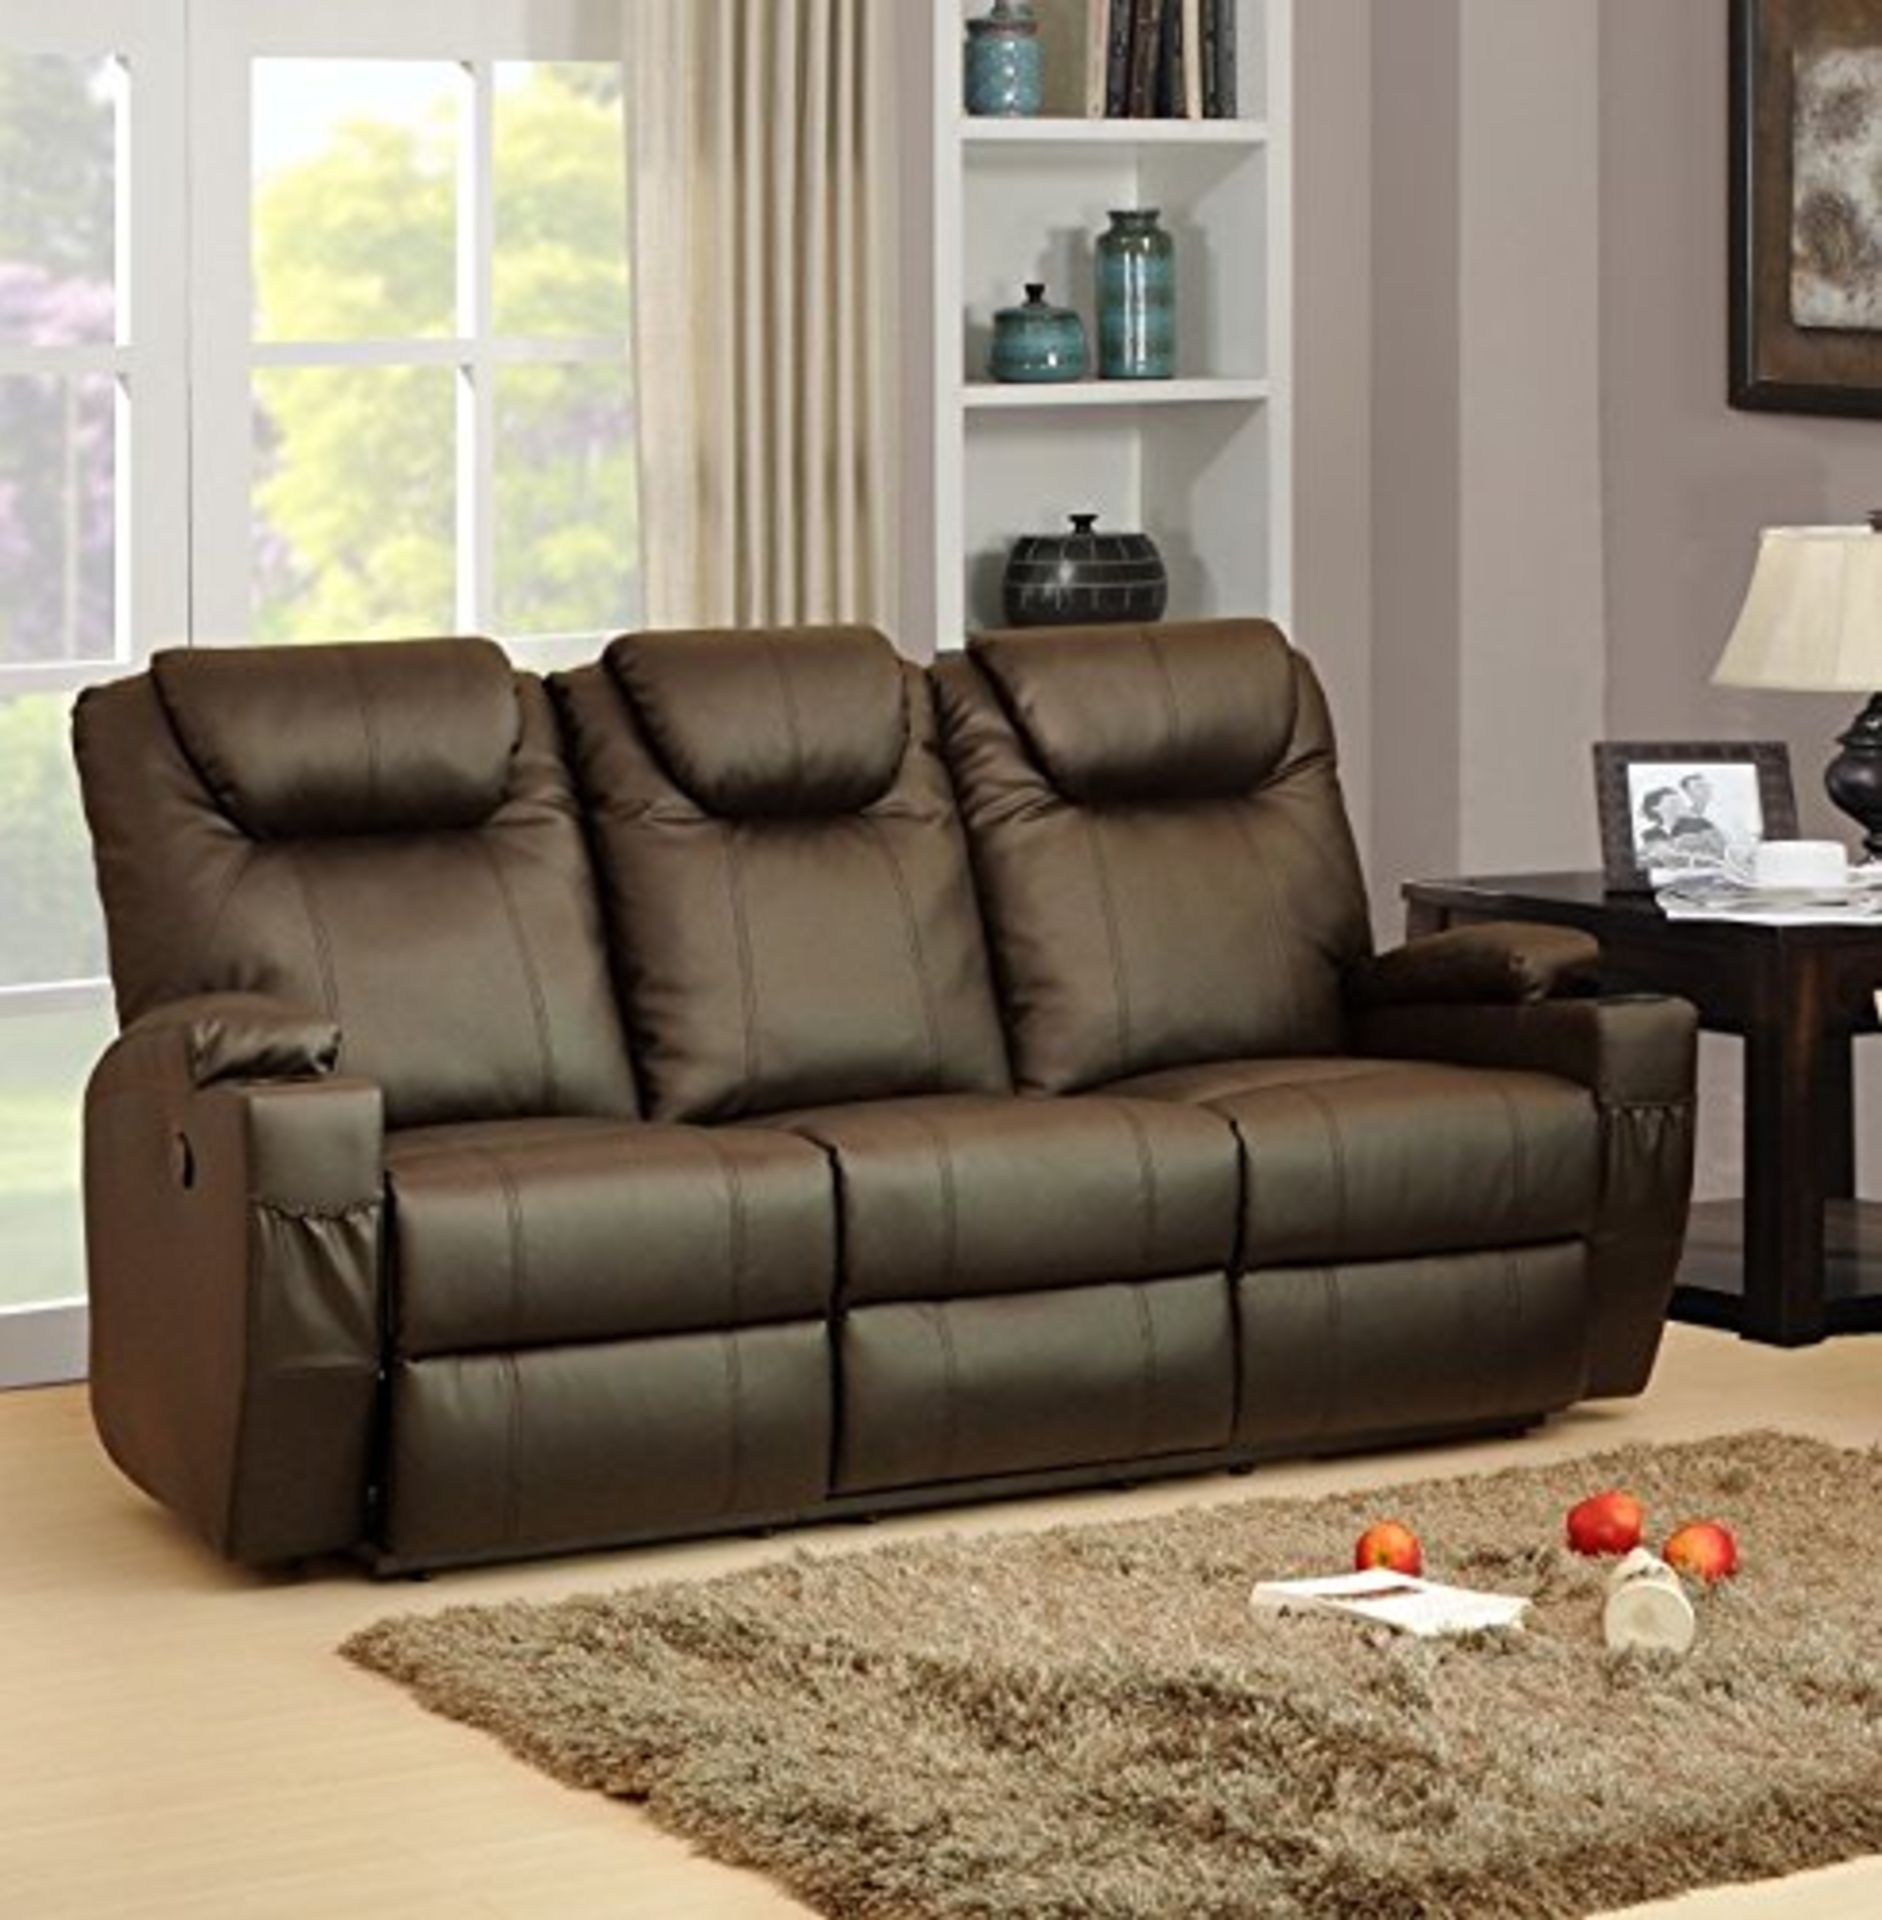 Brand New Boxed 3 Seater Plus 2 Seater Lazyboy Brown Leather Electric Reclining Sofas - Image 2 of 2